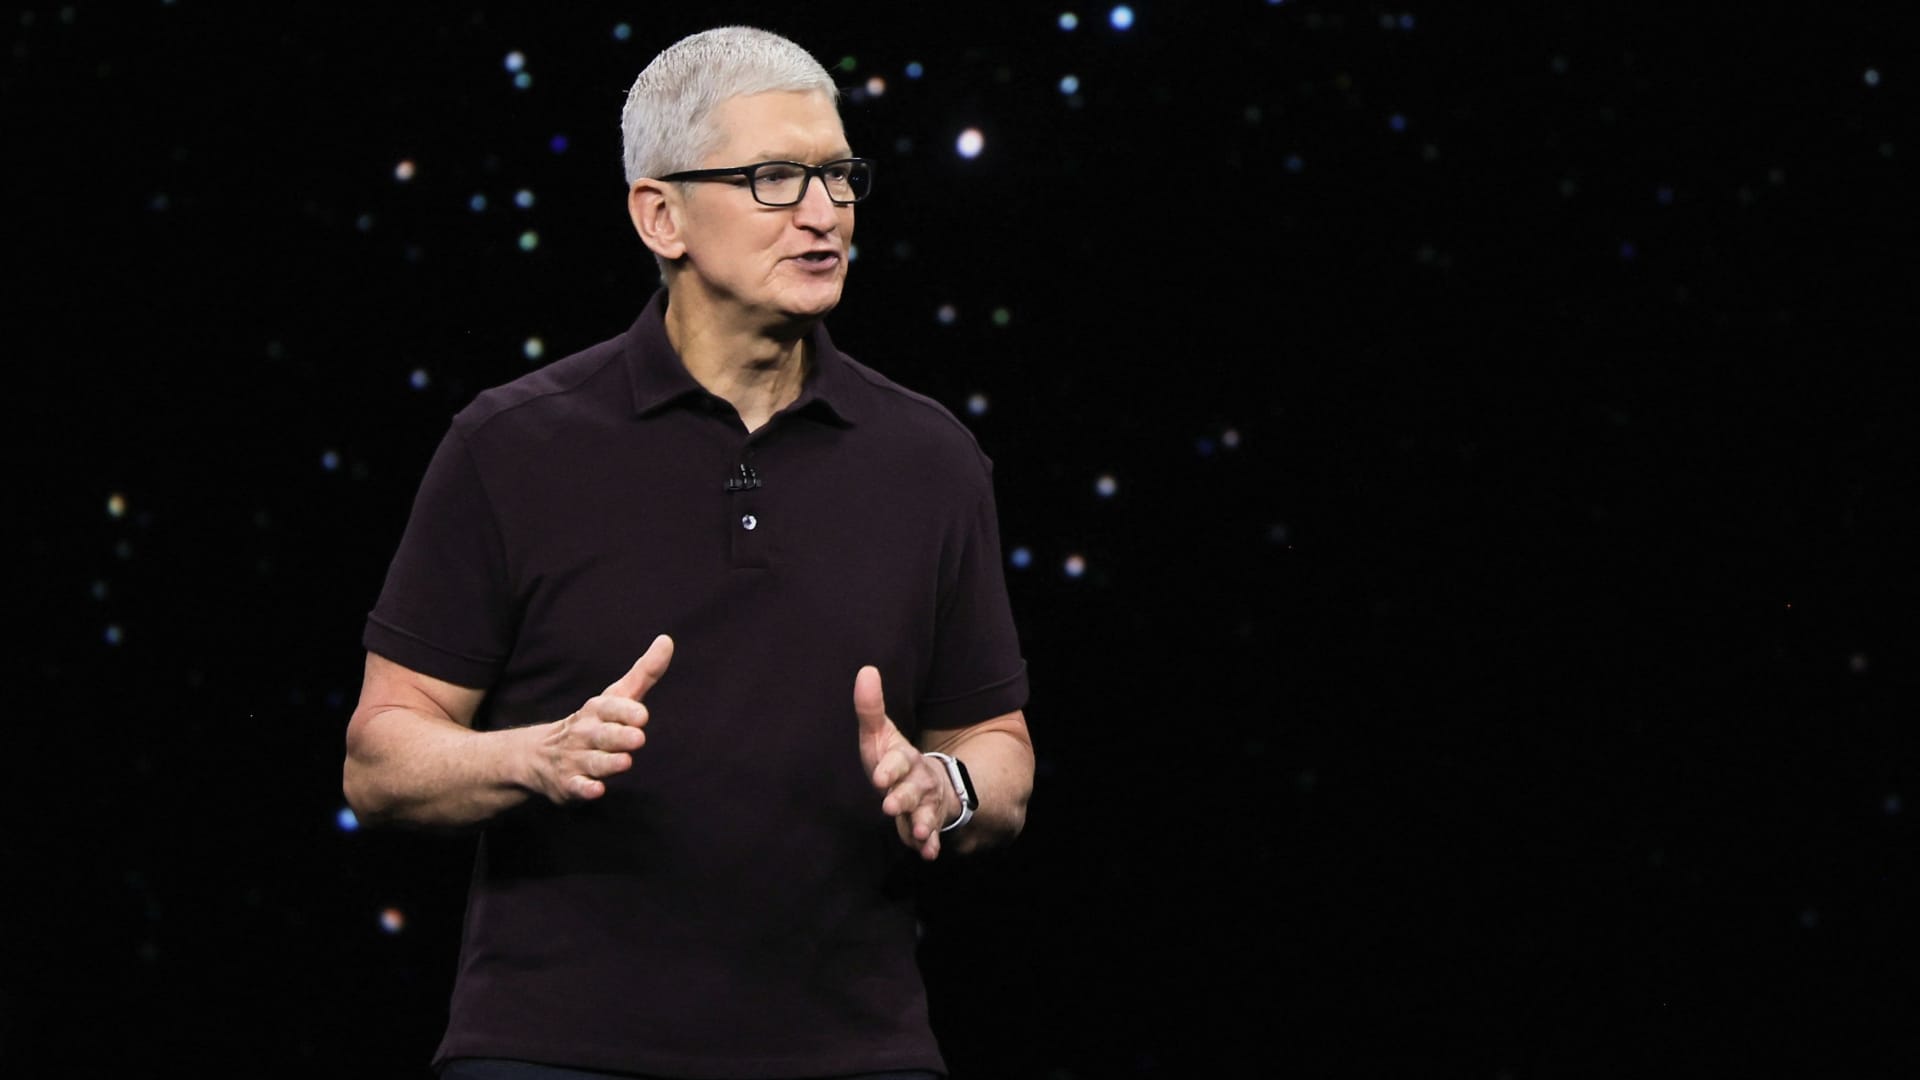 apple-ceo-tim-cook-doesn-t-like-the-metaverse-he-predicts-a-different-technology-will-shape-the-future